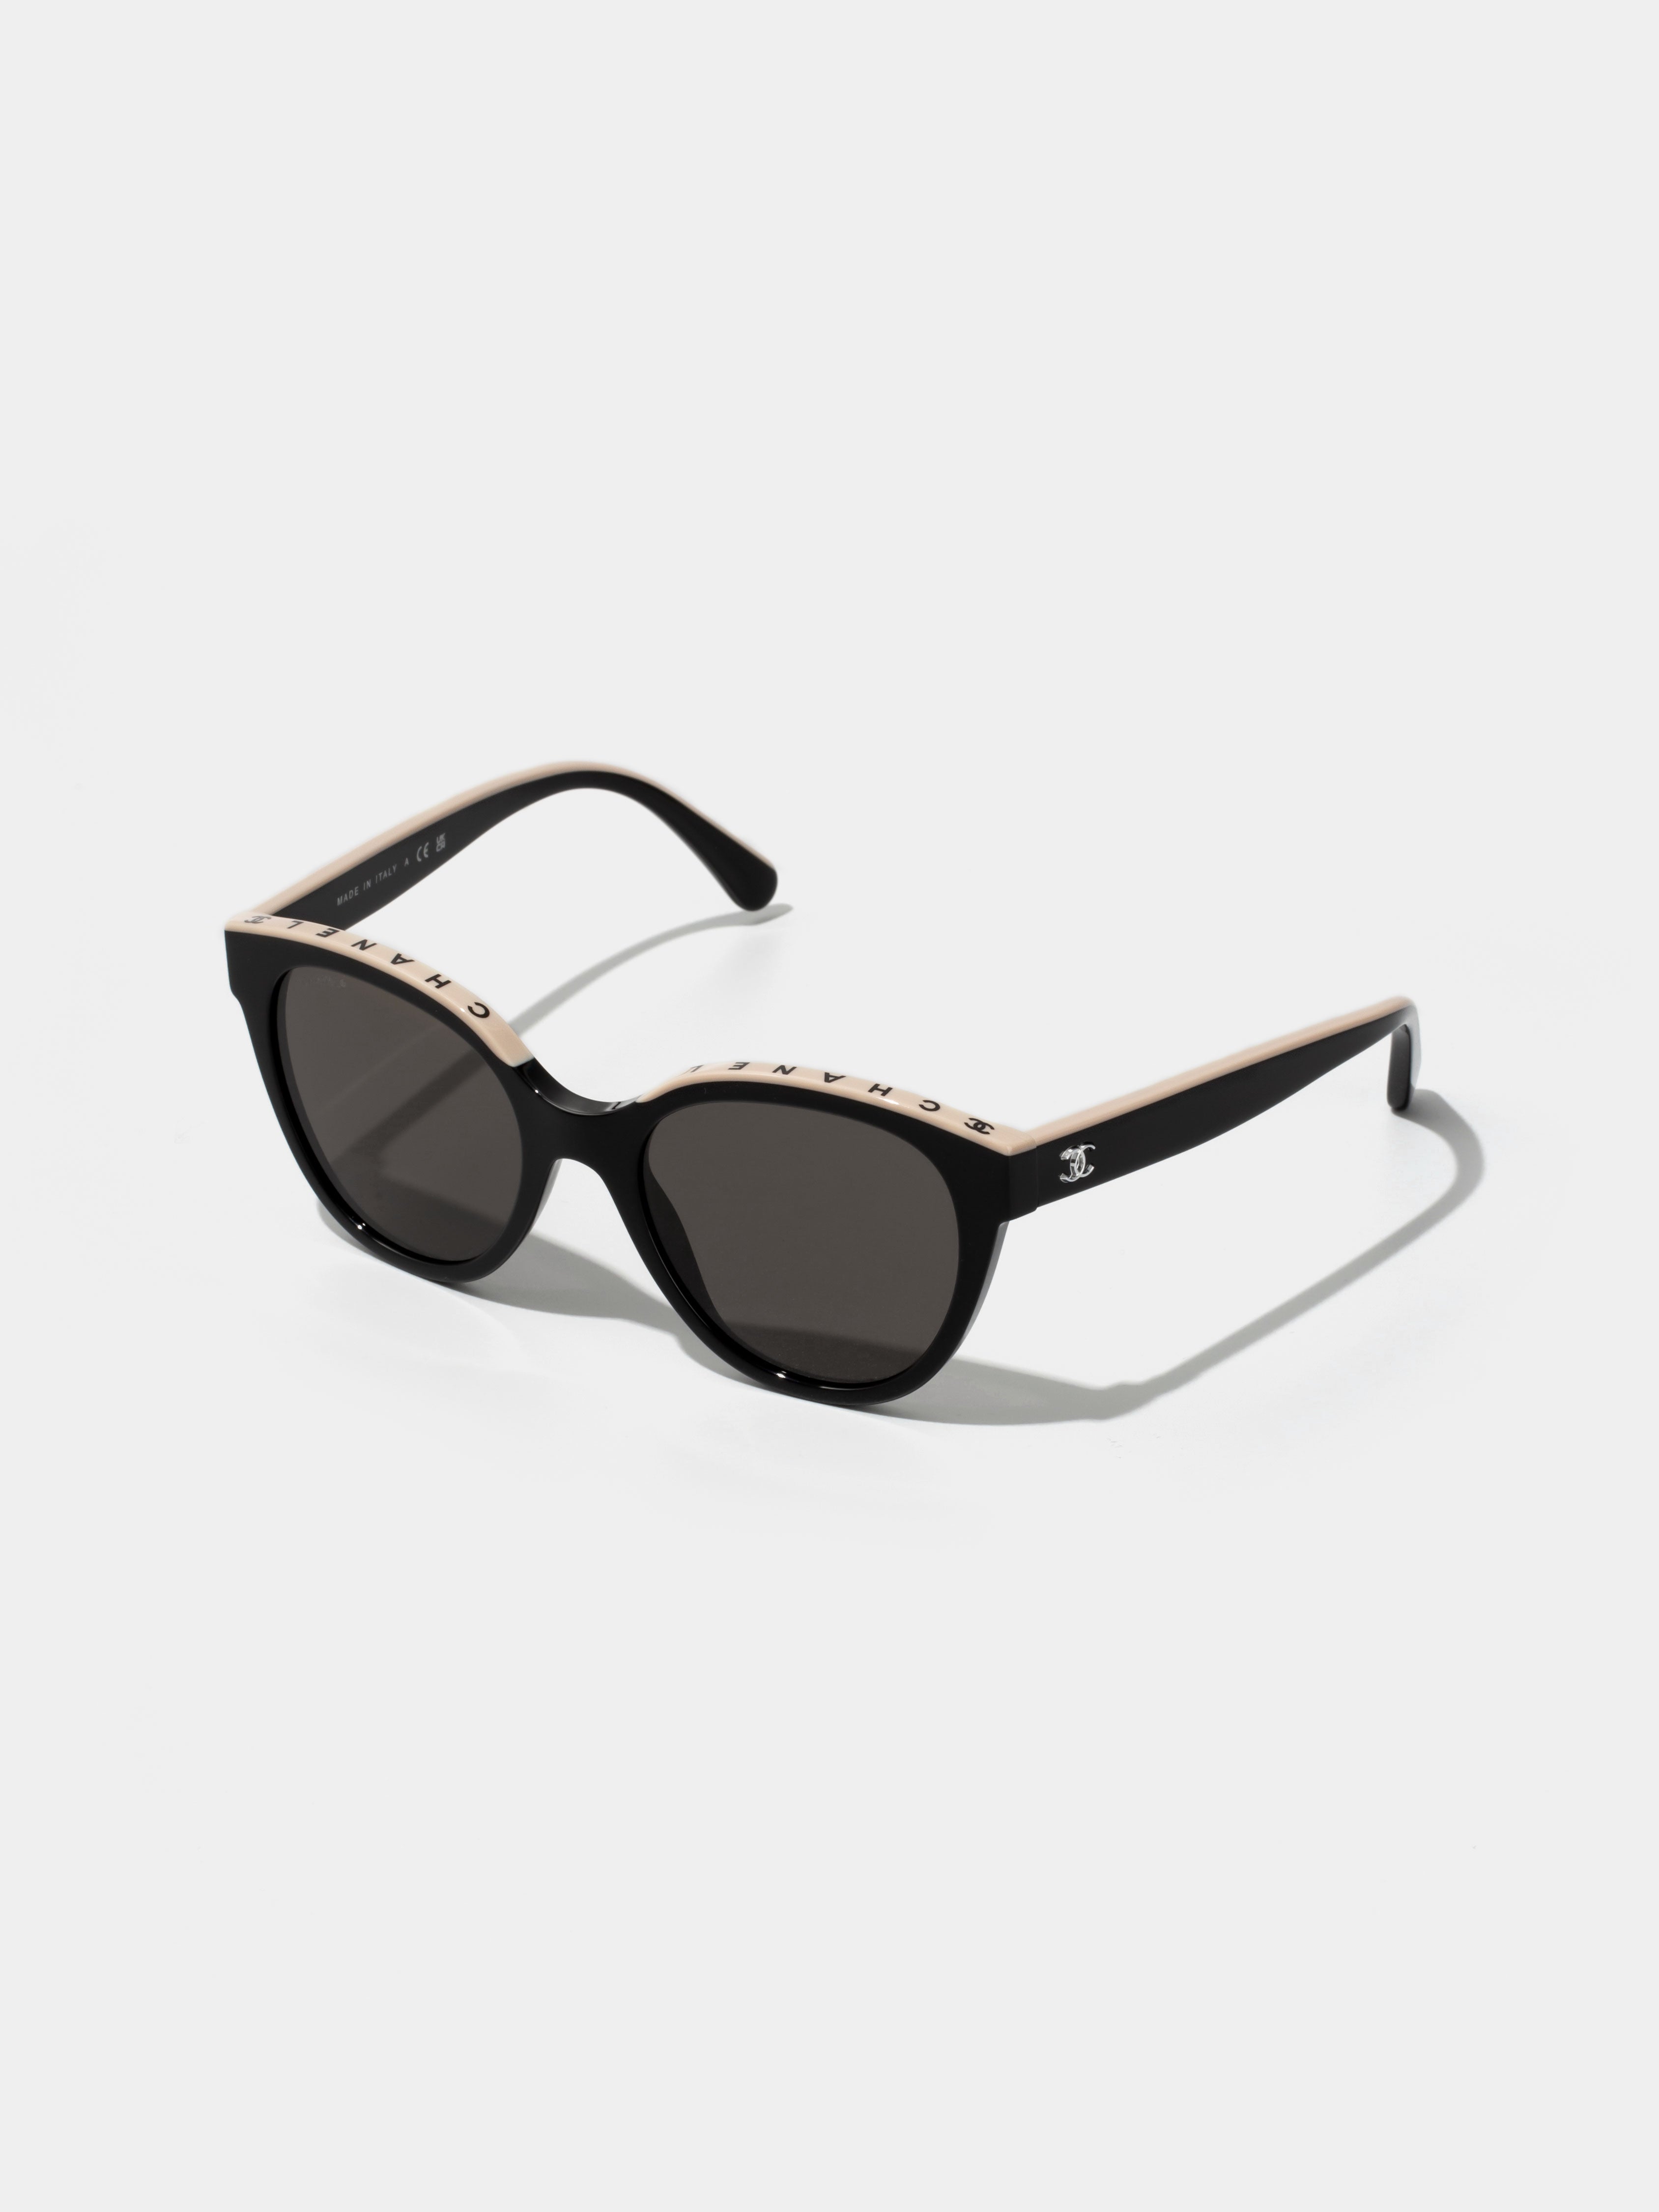 Chanel Sunglass Butterfly Sunglasses Ch5414 in Black